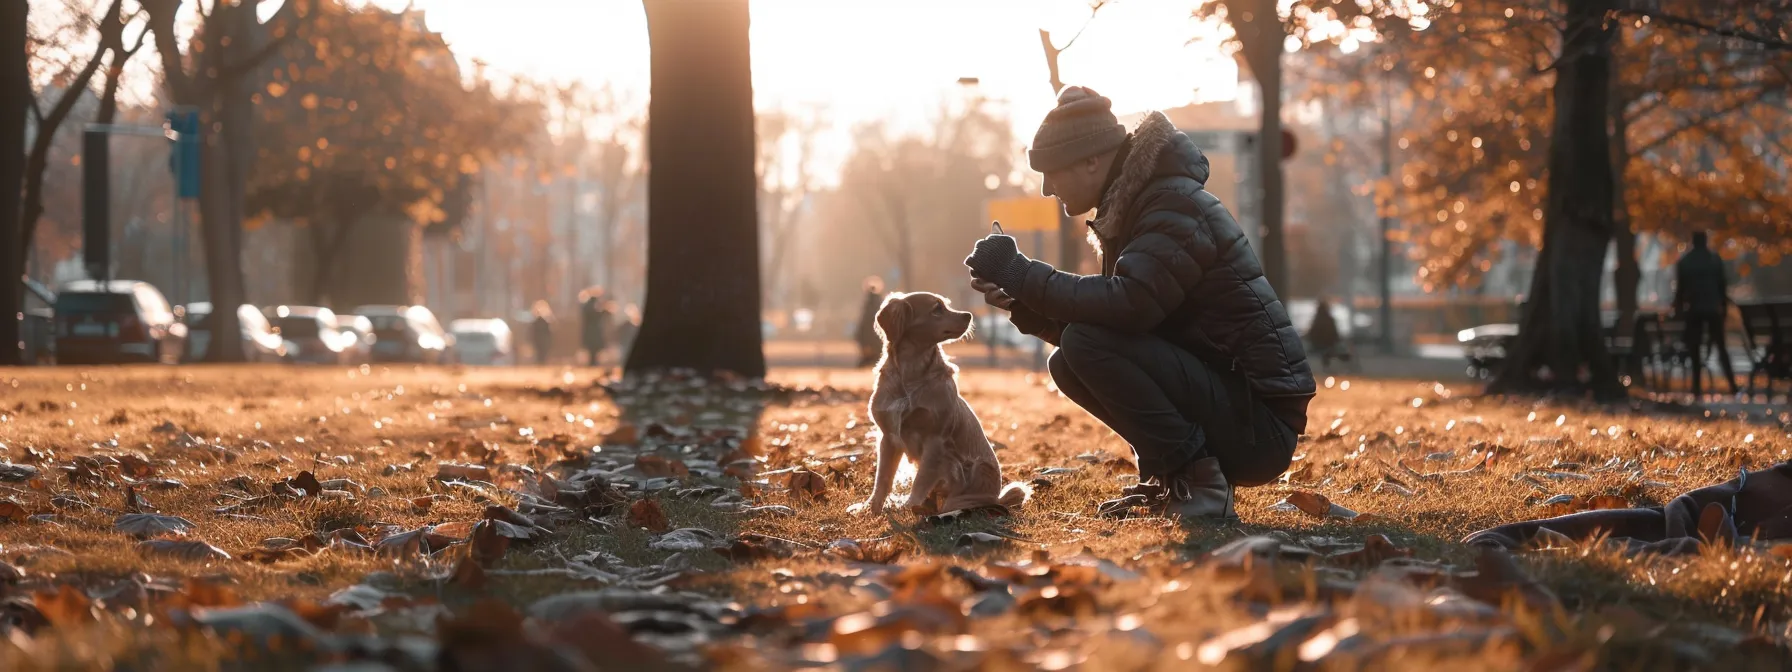 a dog owner training his pet in a busy city park, surrounded by noise and distractions.